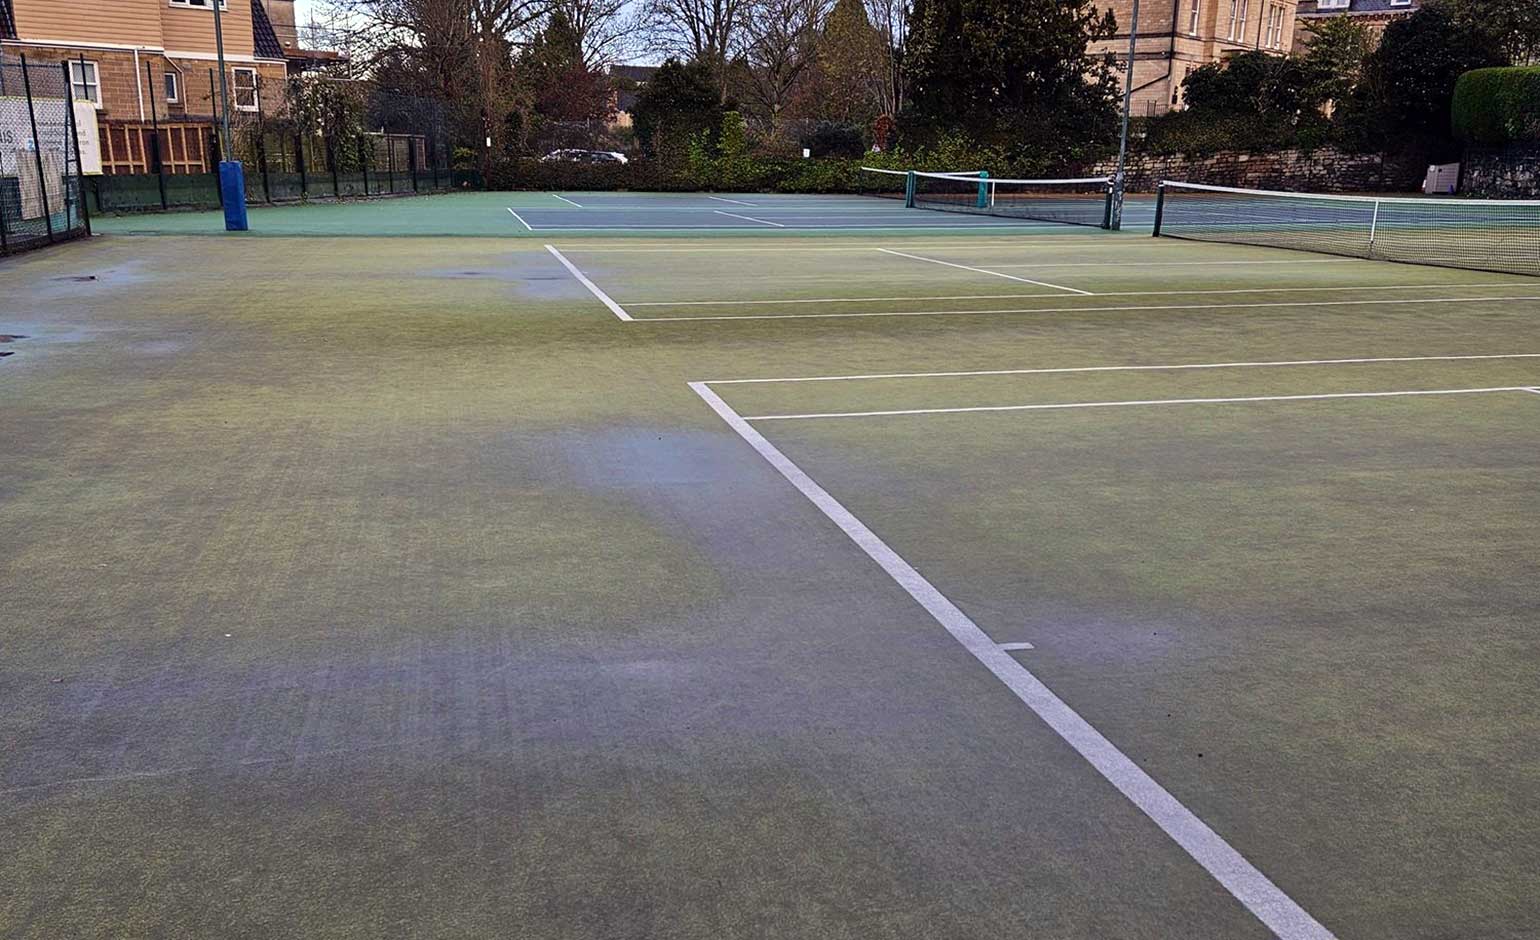 Bath Tennis Club close to acing its ongoing refurbishment appeal